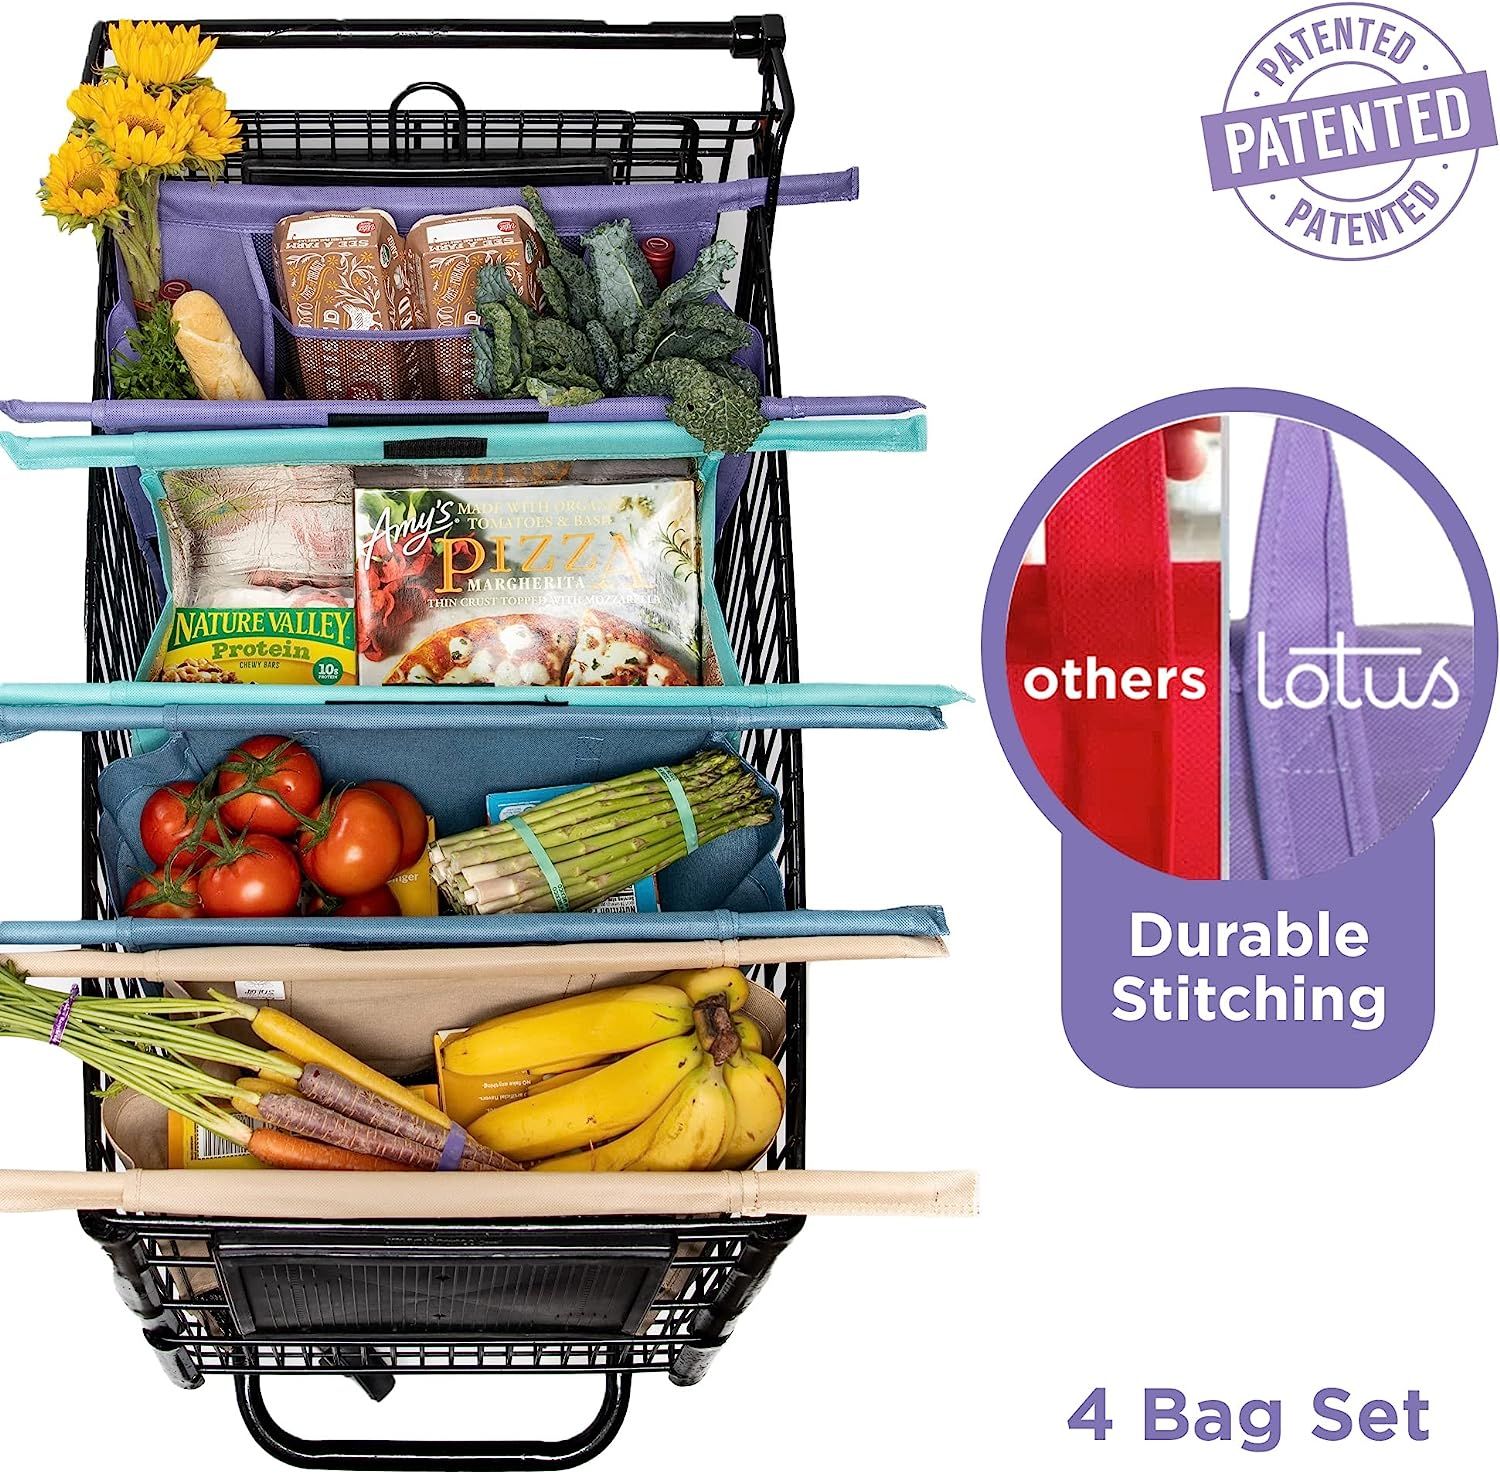 Lotus Trolley Bags Set of 4 Premium Quality Reusable Grocery Cart Bags | w/ LRG Insulated Cooler ... | Amazon (US)